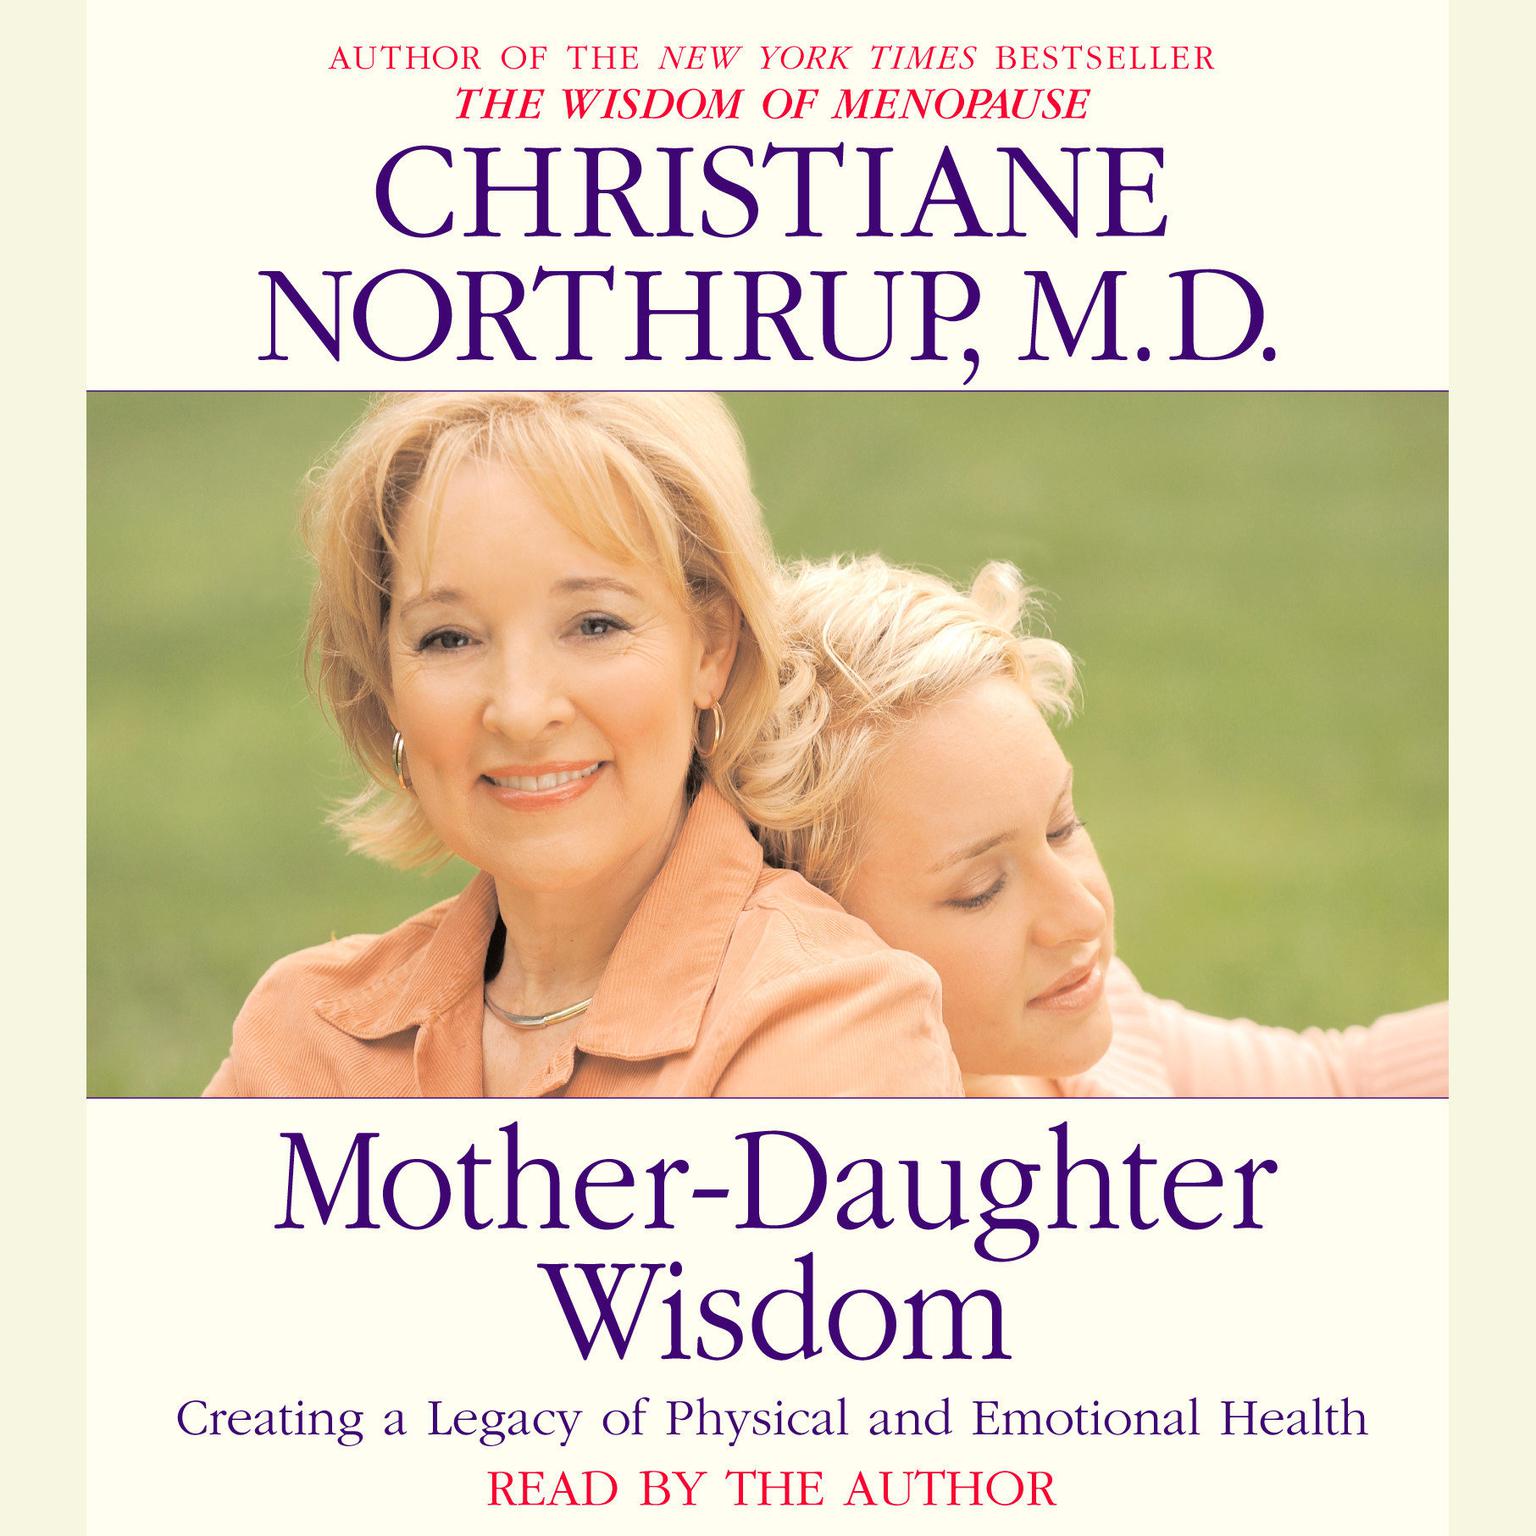 Mother-Daughter Wisdom (Abridged): Creating a Legacy of Physical and Emotional Health Audiobook, by Christiane Northrup